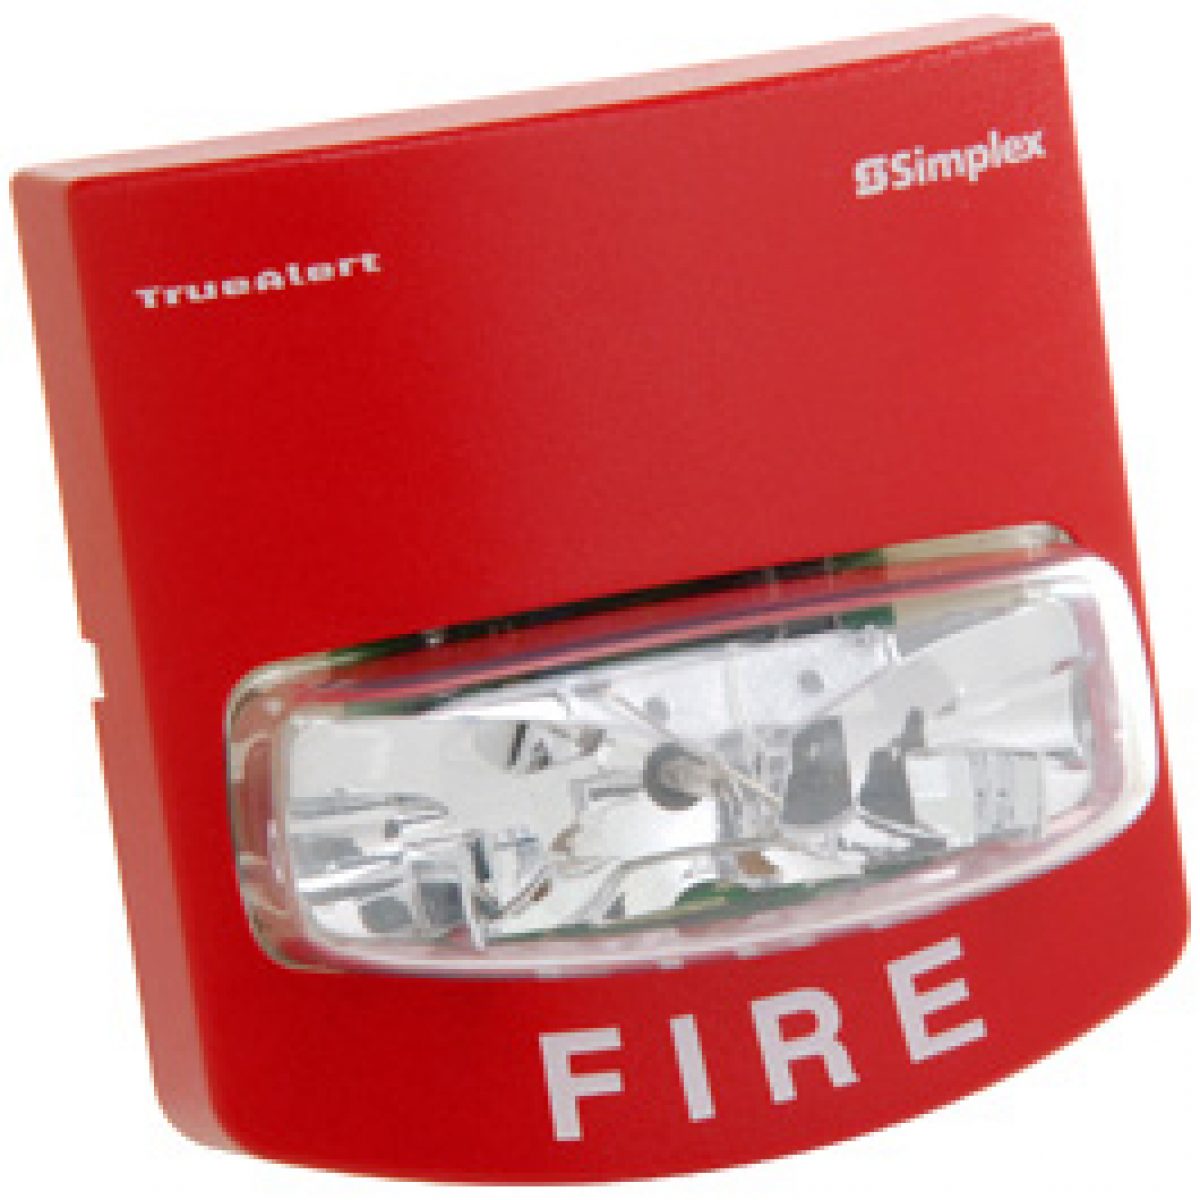 Simplex 4906-9101 Wall Mount Fire Alarm Strobe 100 AVAILABLE FREE SHIPPING !!! 